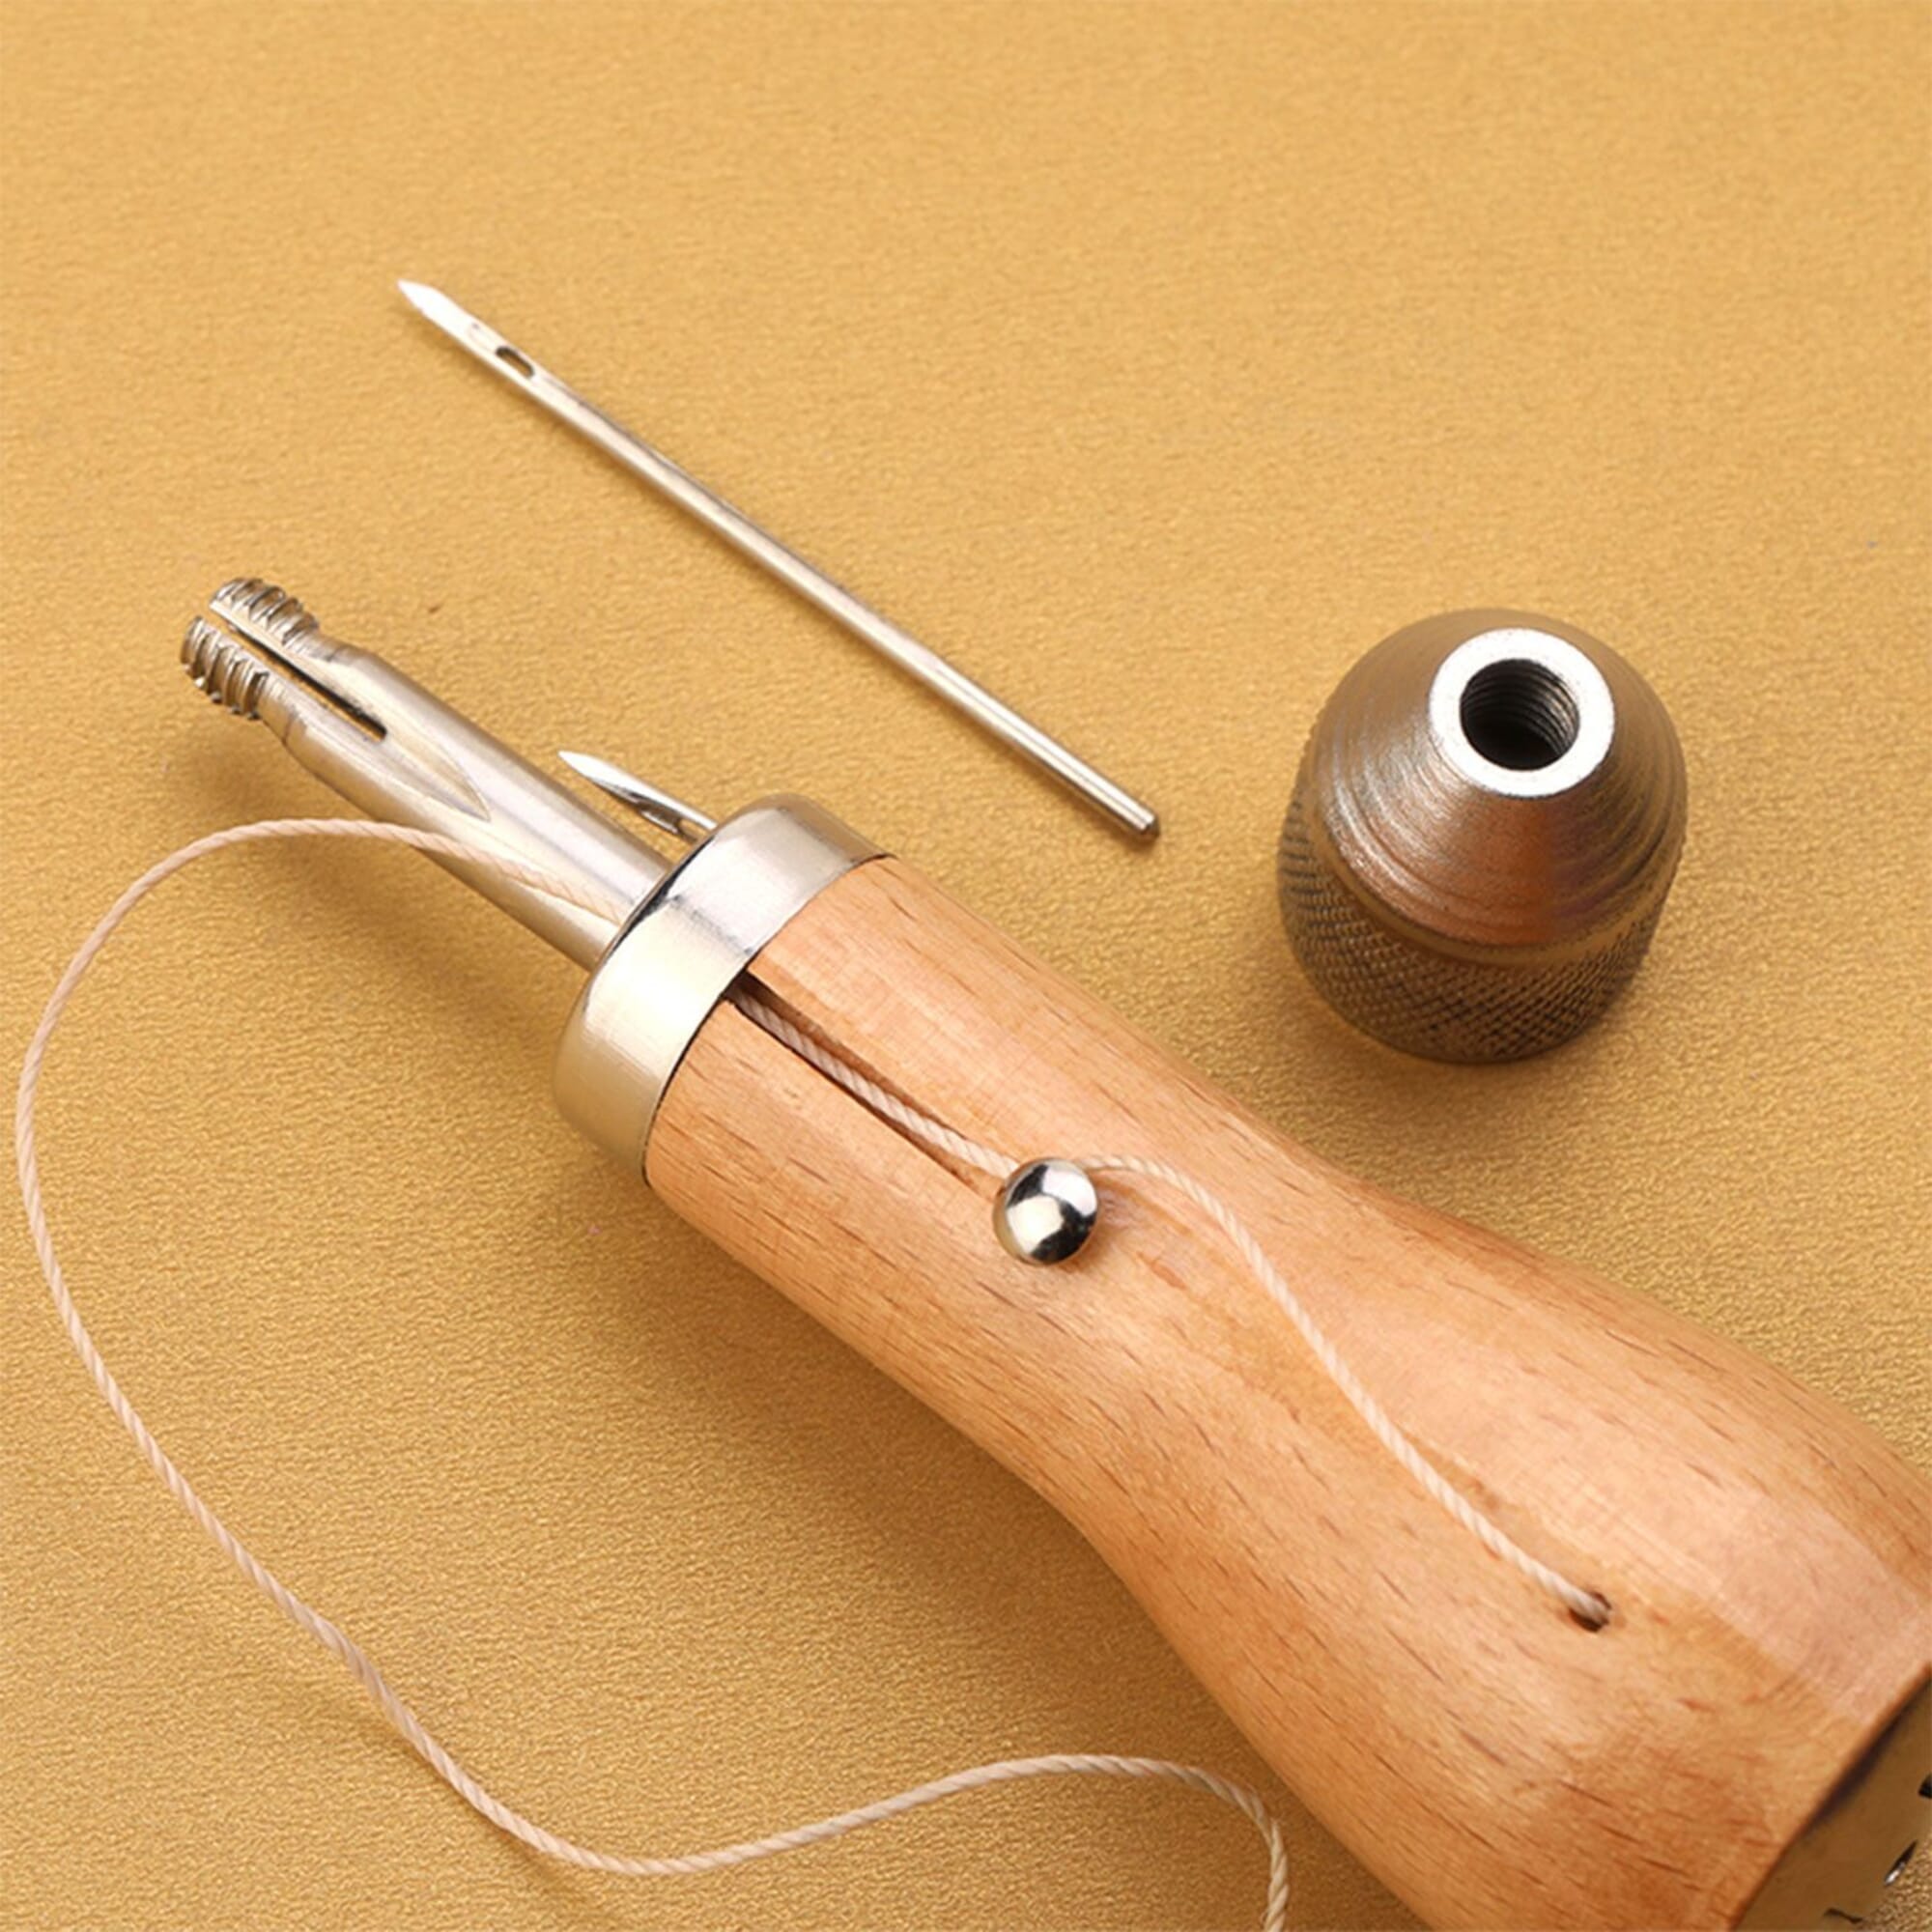 Leather Sewing Kit With 2 Needles Manual Stitcher With Wooden